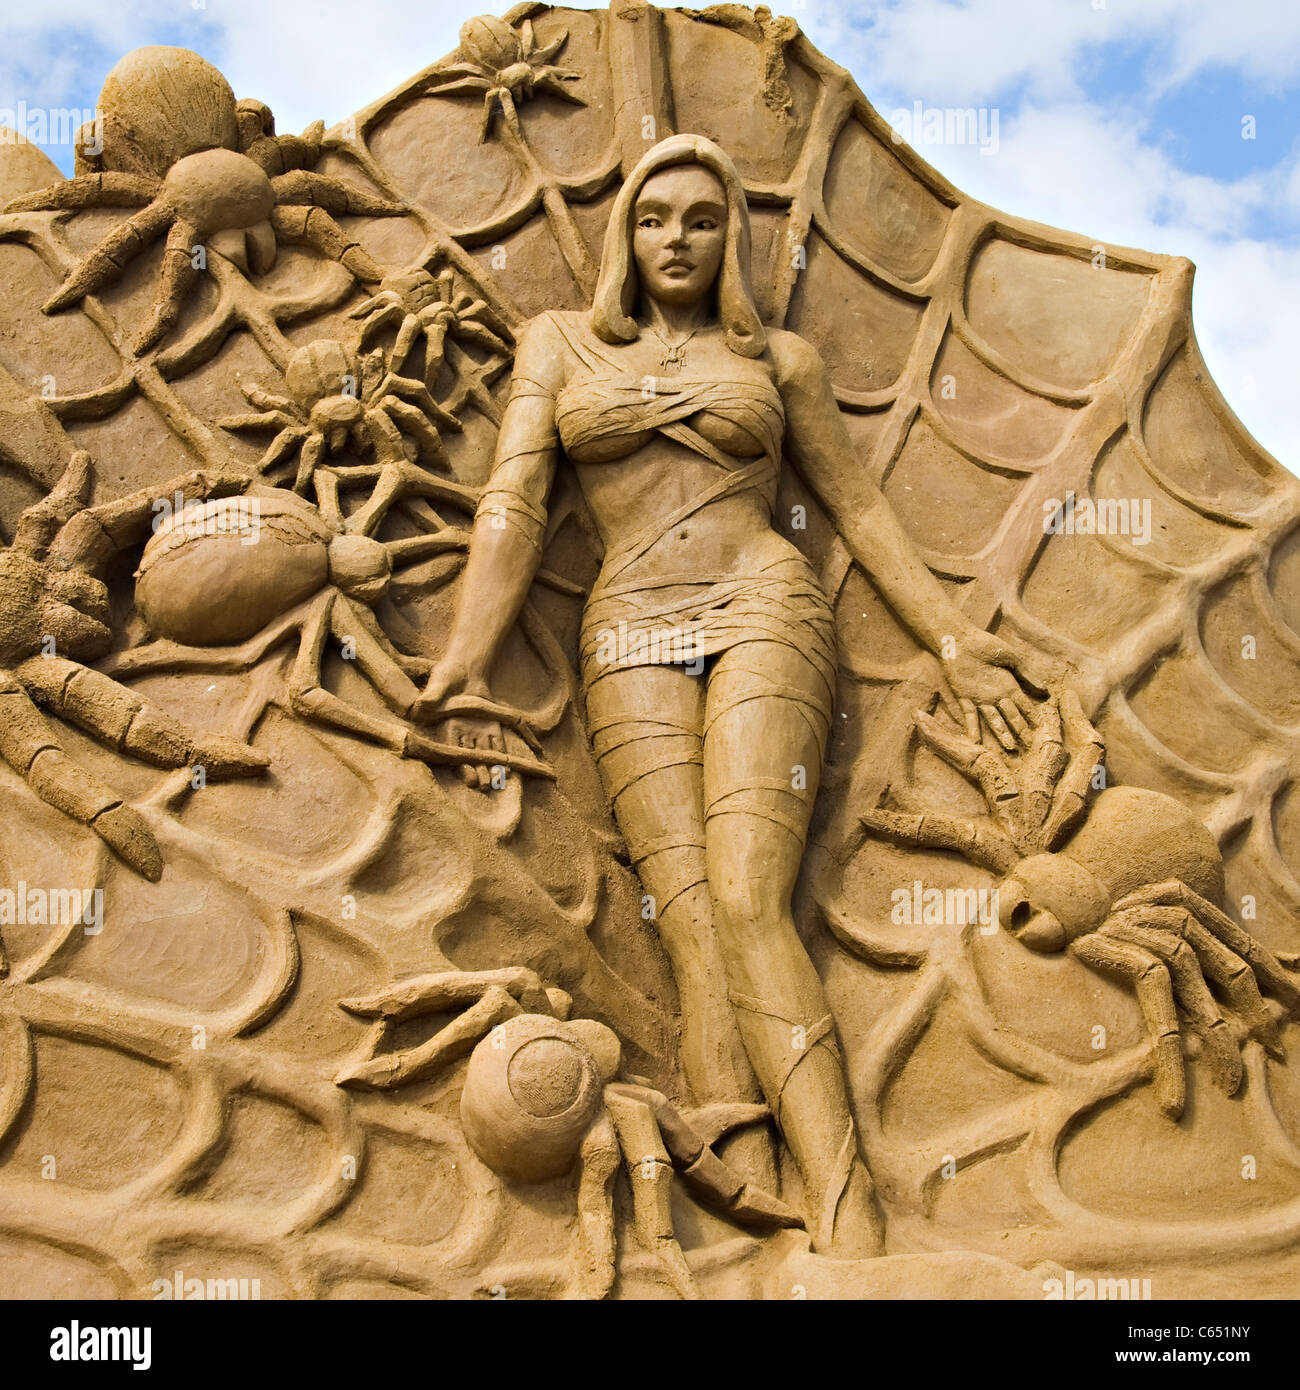 Visitors Look Sand Sculpture On Display Editorial Stock Photo - Stock Image